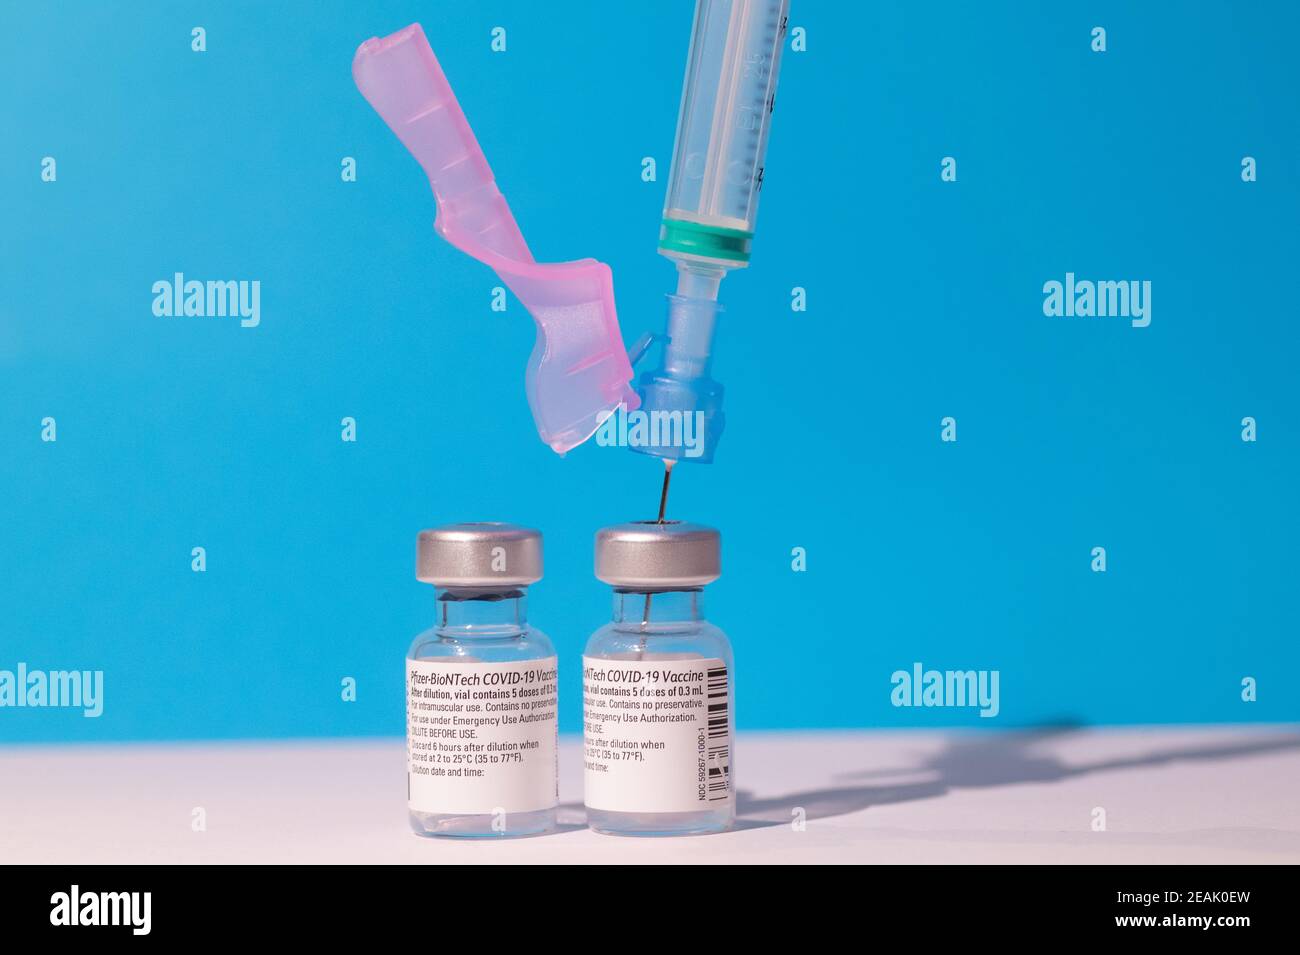 Two vials of Pfizer - BioNTech COVID-19 vaccine for coronavirus treatment with a syringe Stock Photo